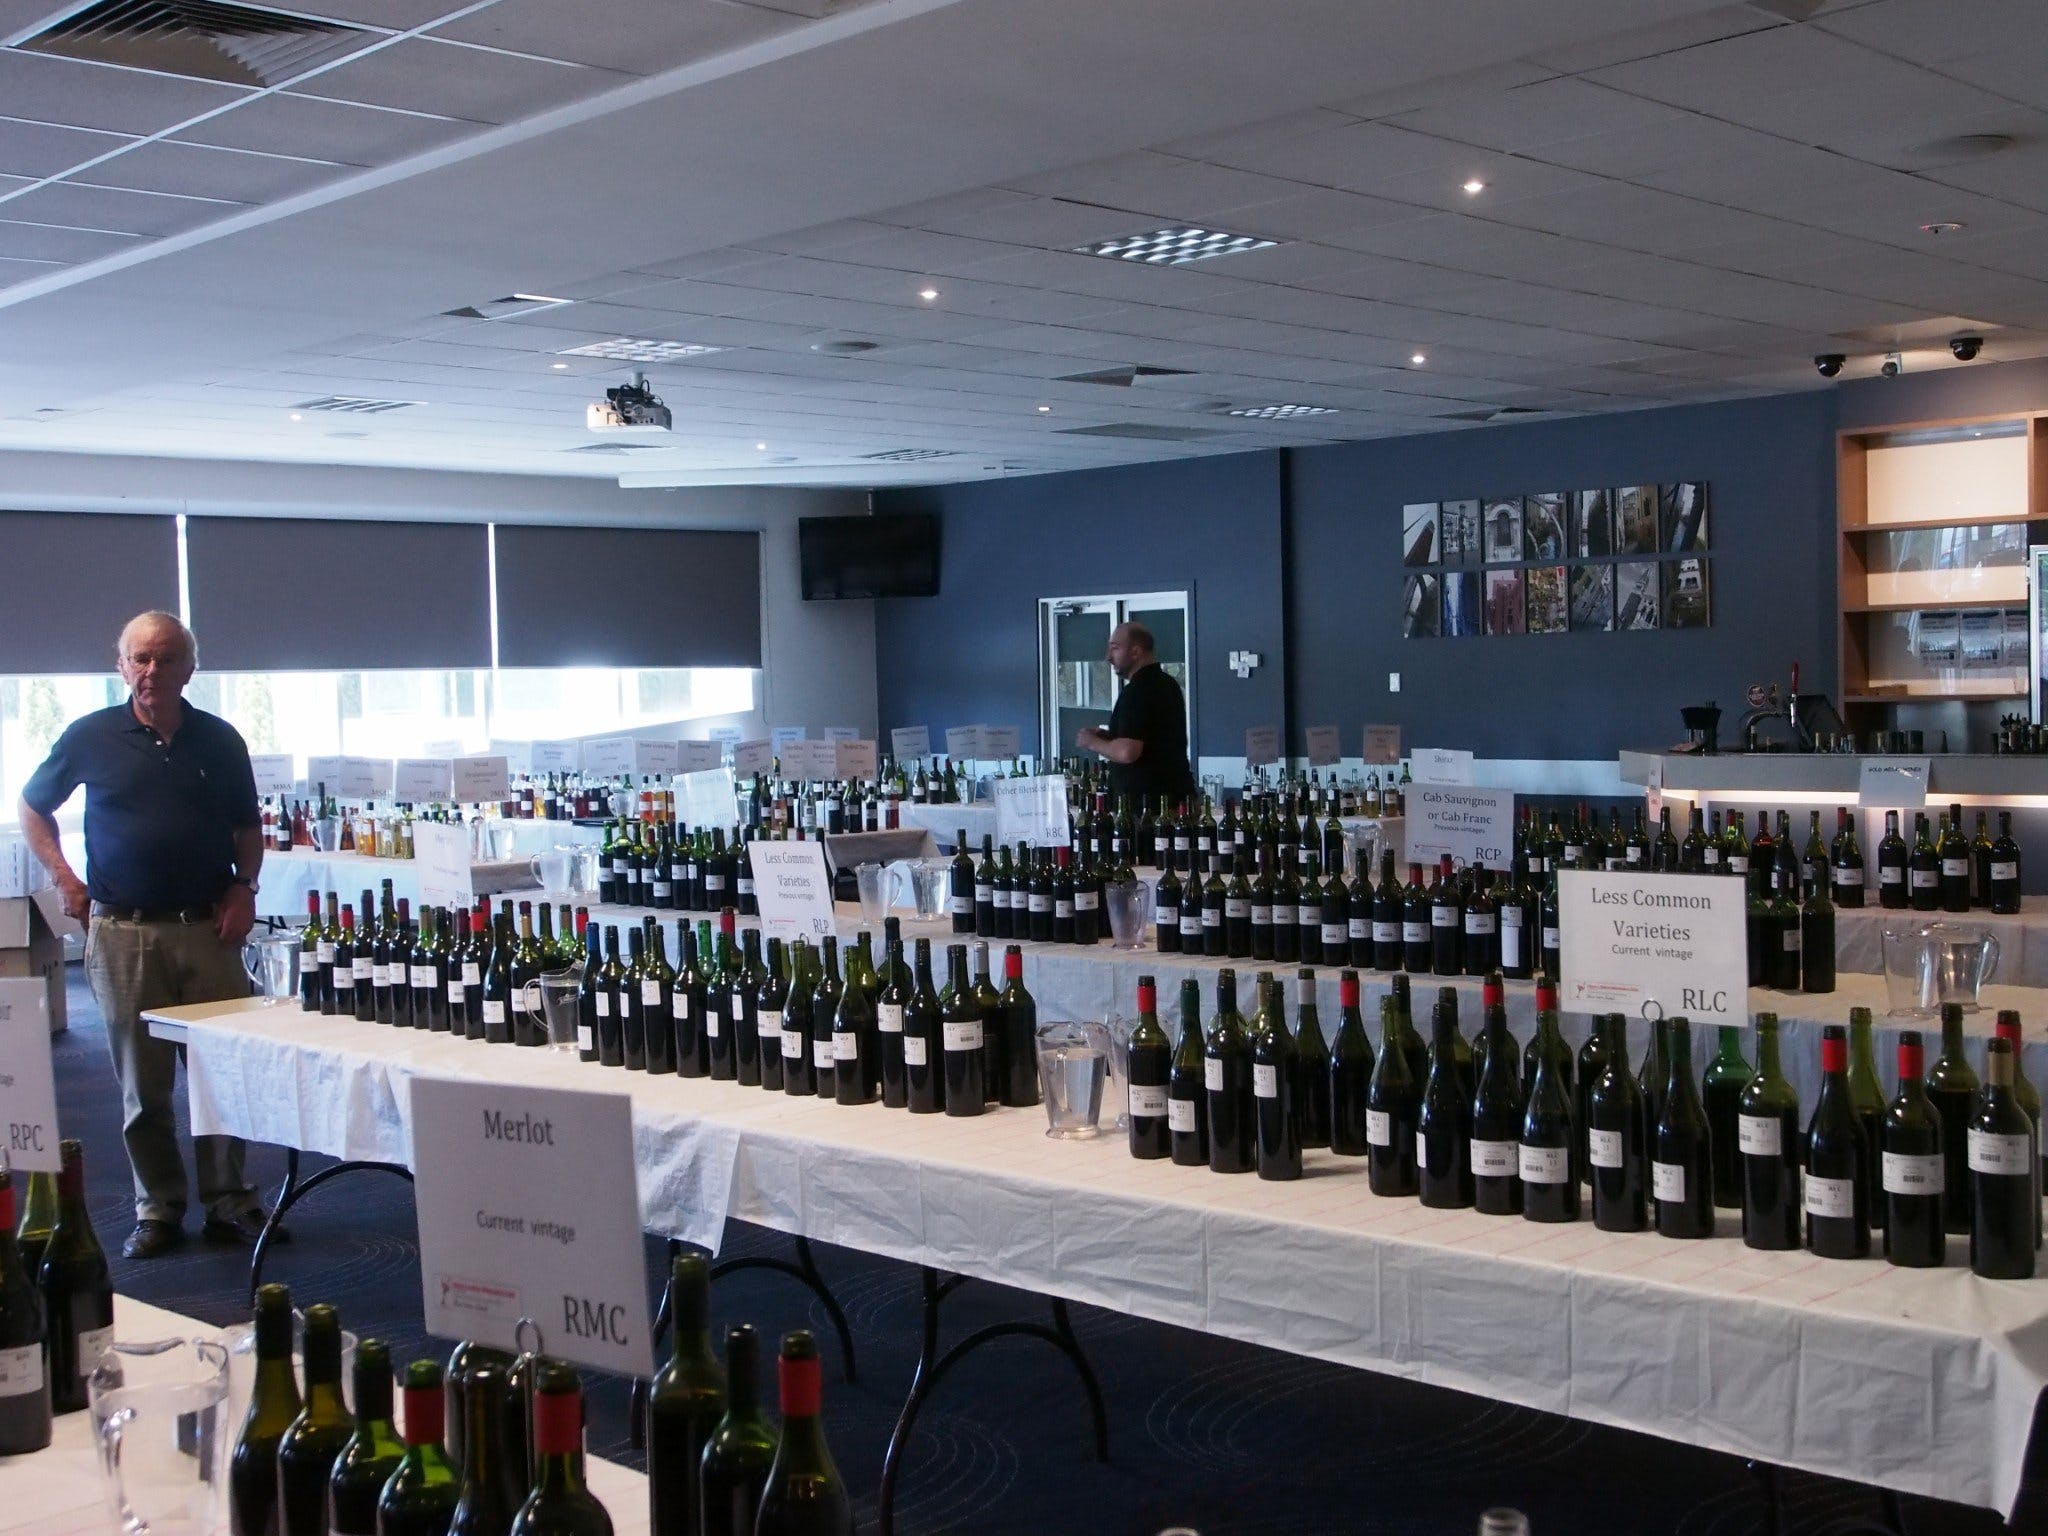 Eltham and District Wine Guild Annual Wine Show - 51st Annual Show - Carnarvon Accommodation